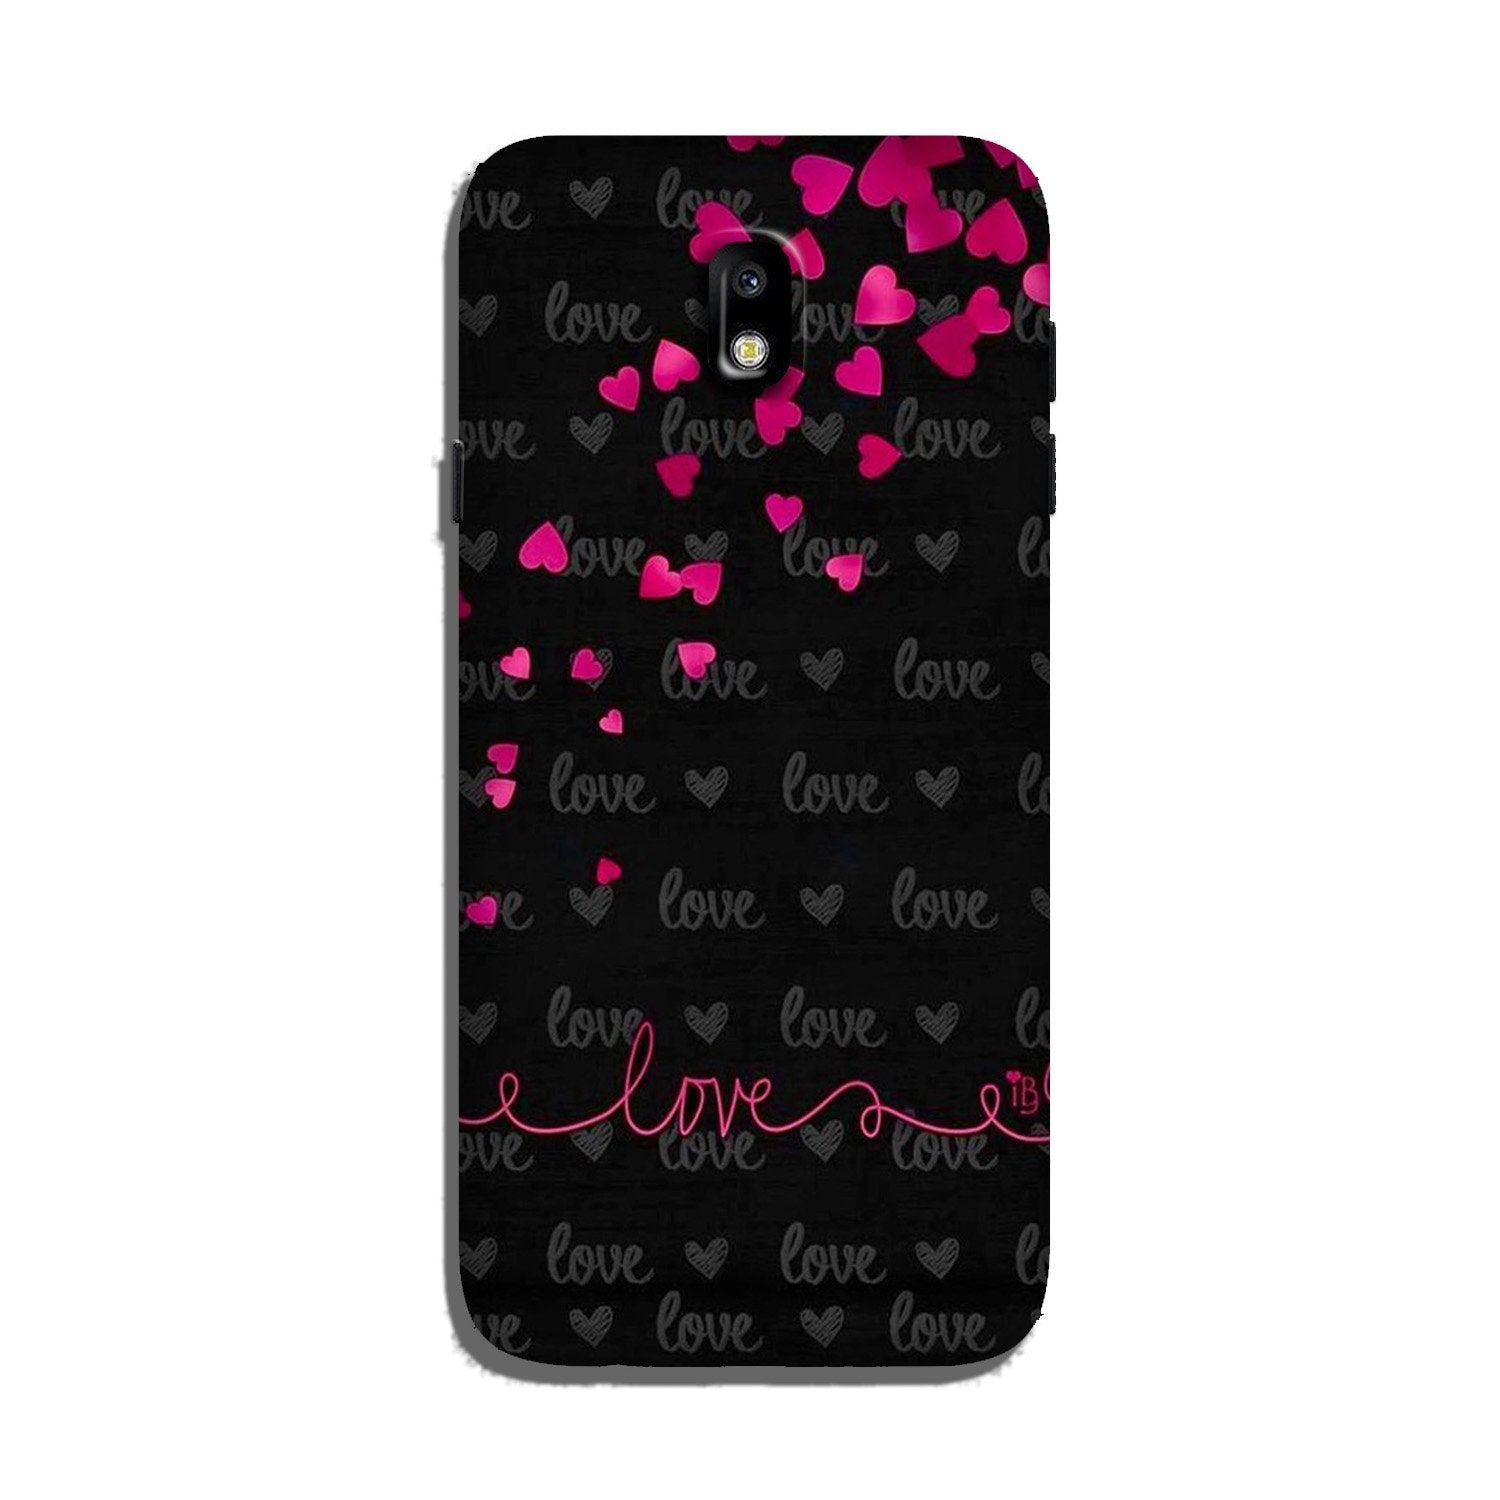 Love in Air Case for Galaxy J5 Pro